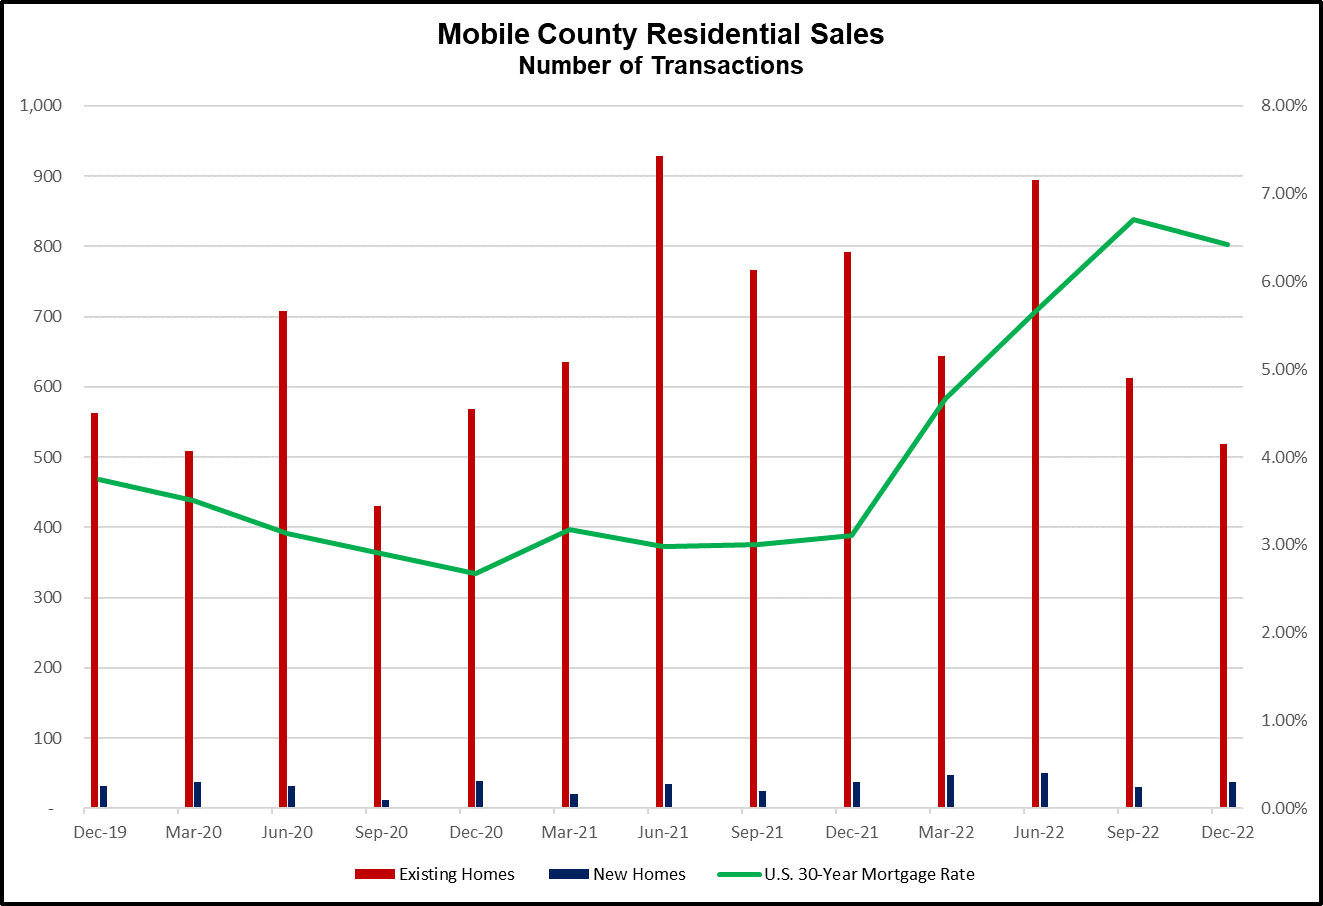 Mobile County Residential Sales